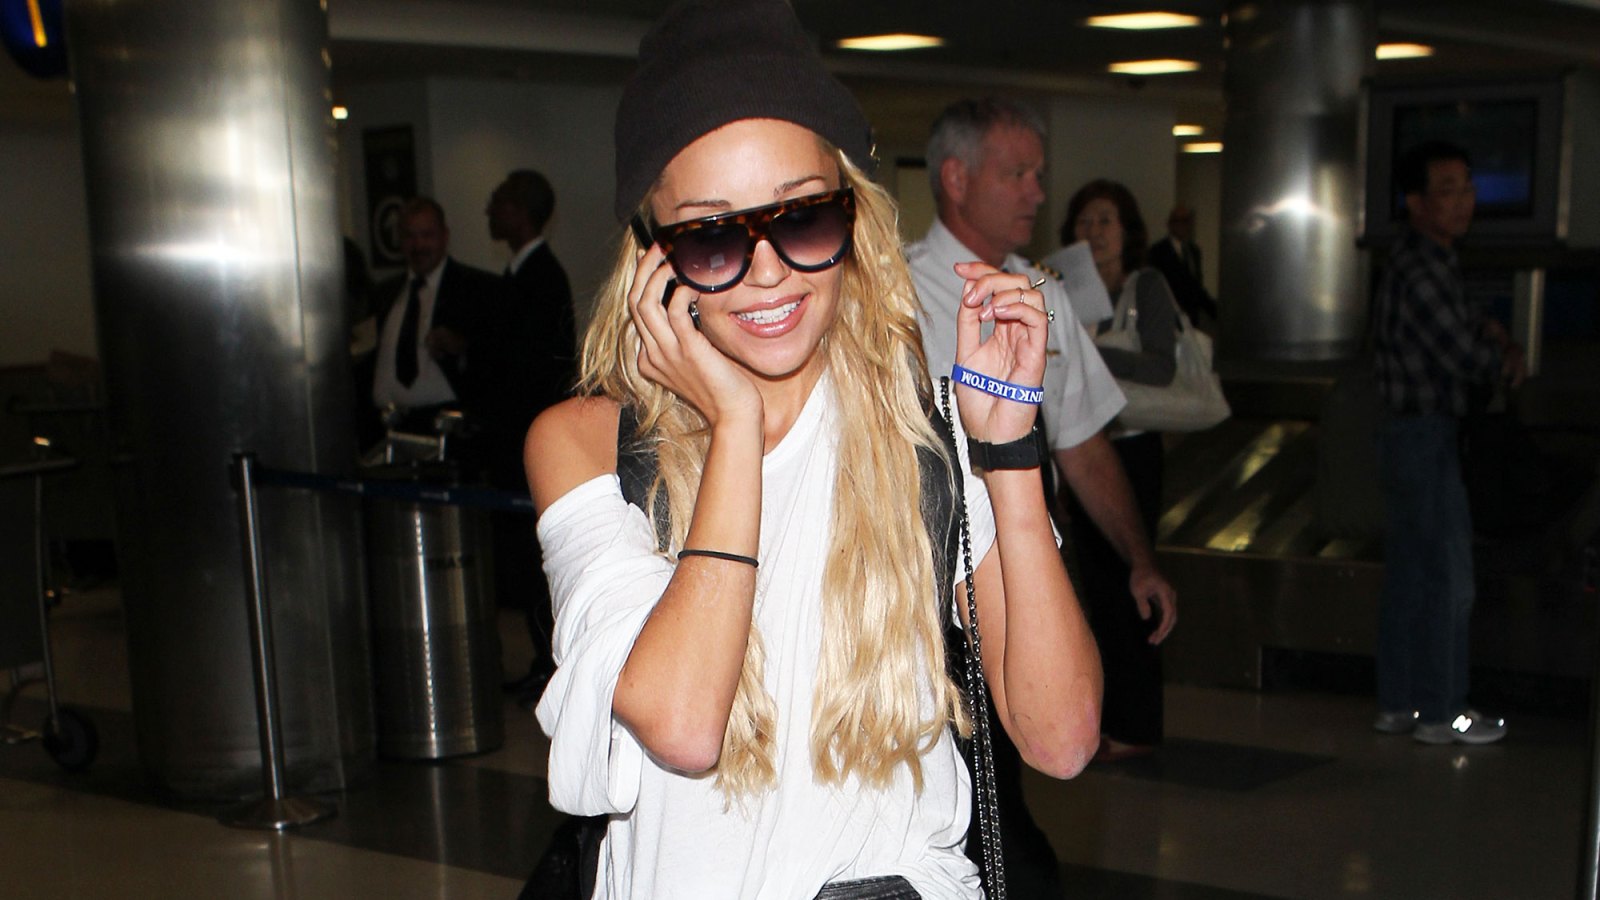 Amanda Bynes Will Have a ‘Low-Key Christmas’ With Friends, Is In ‘the Best Place’ She’s Ever Been Ahead of Holiday